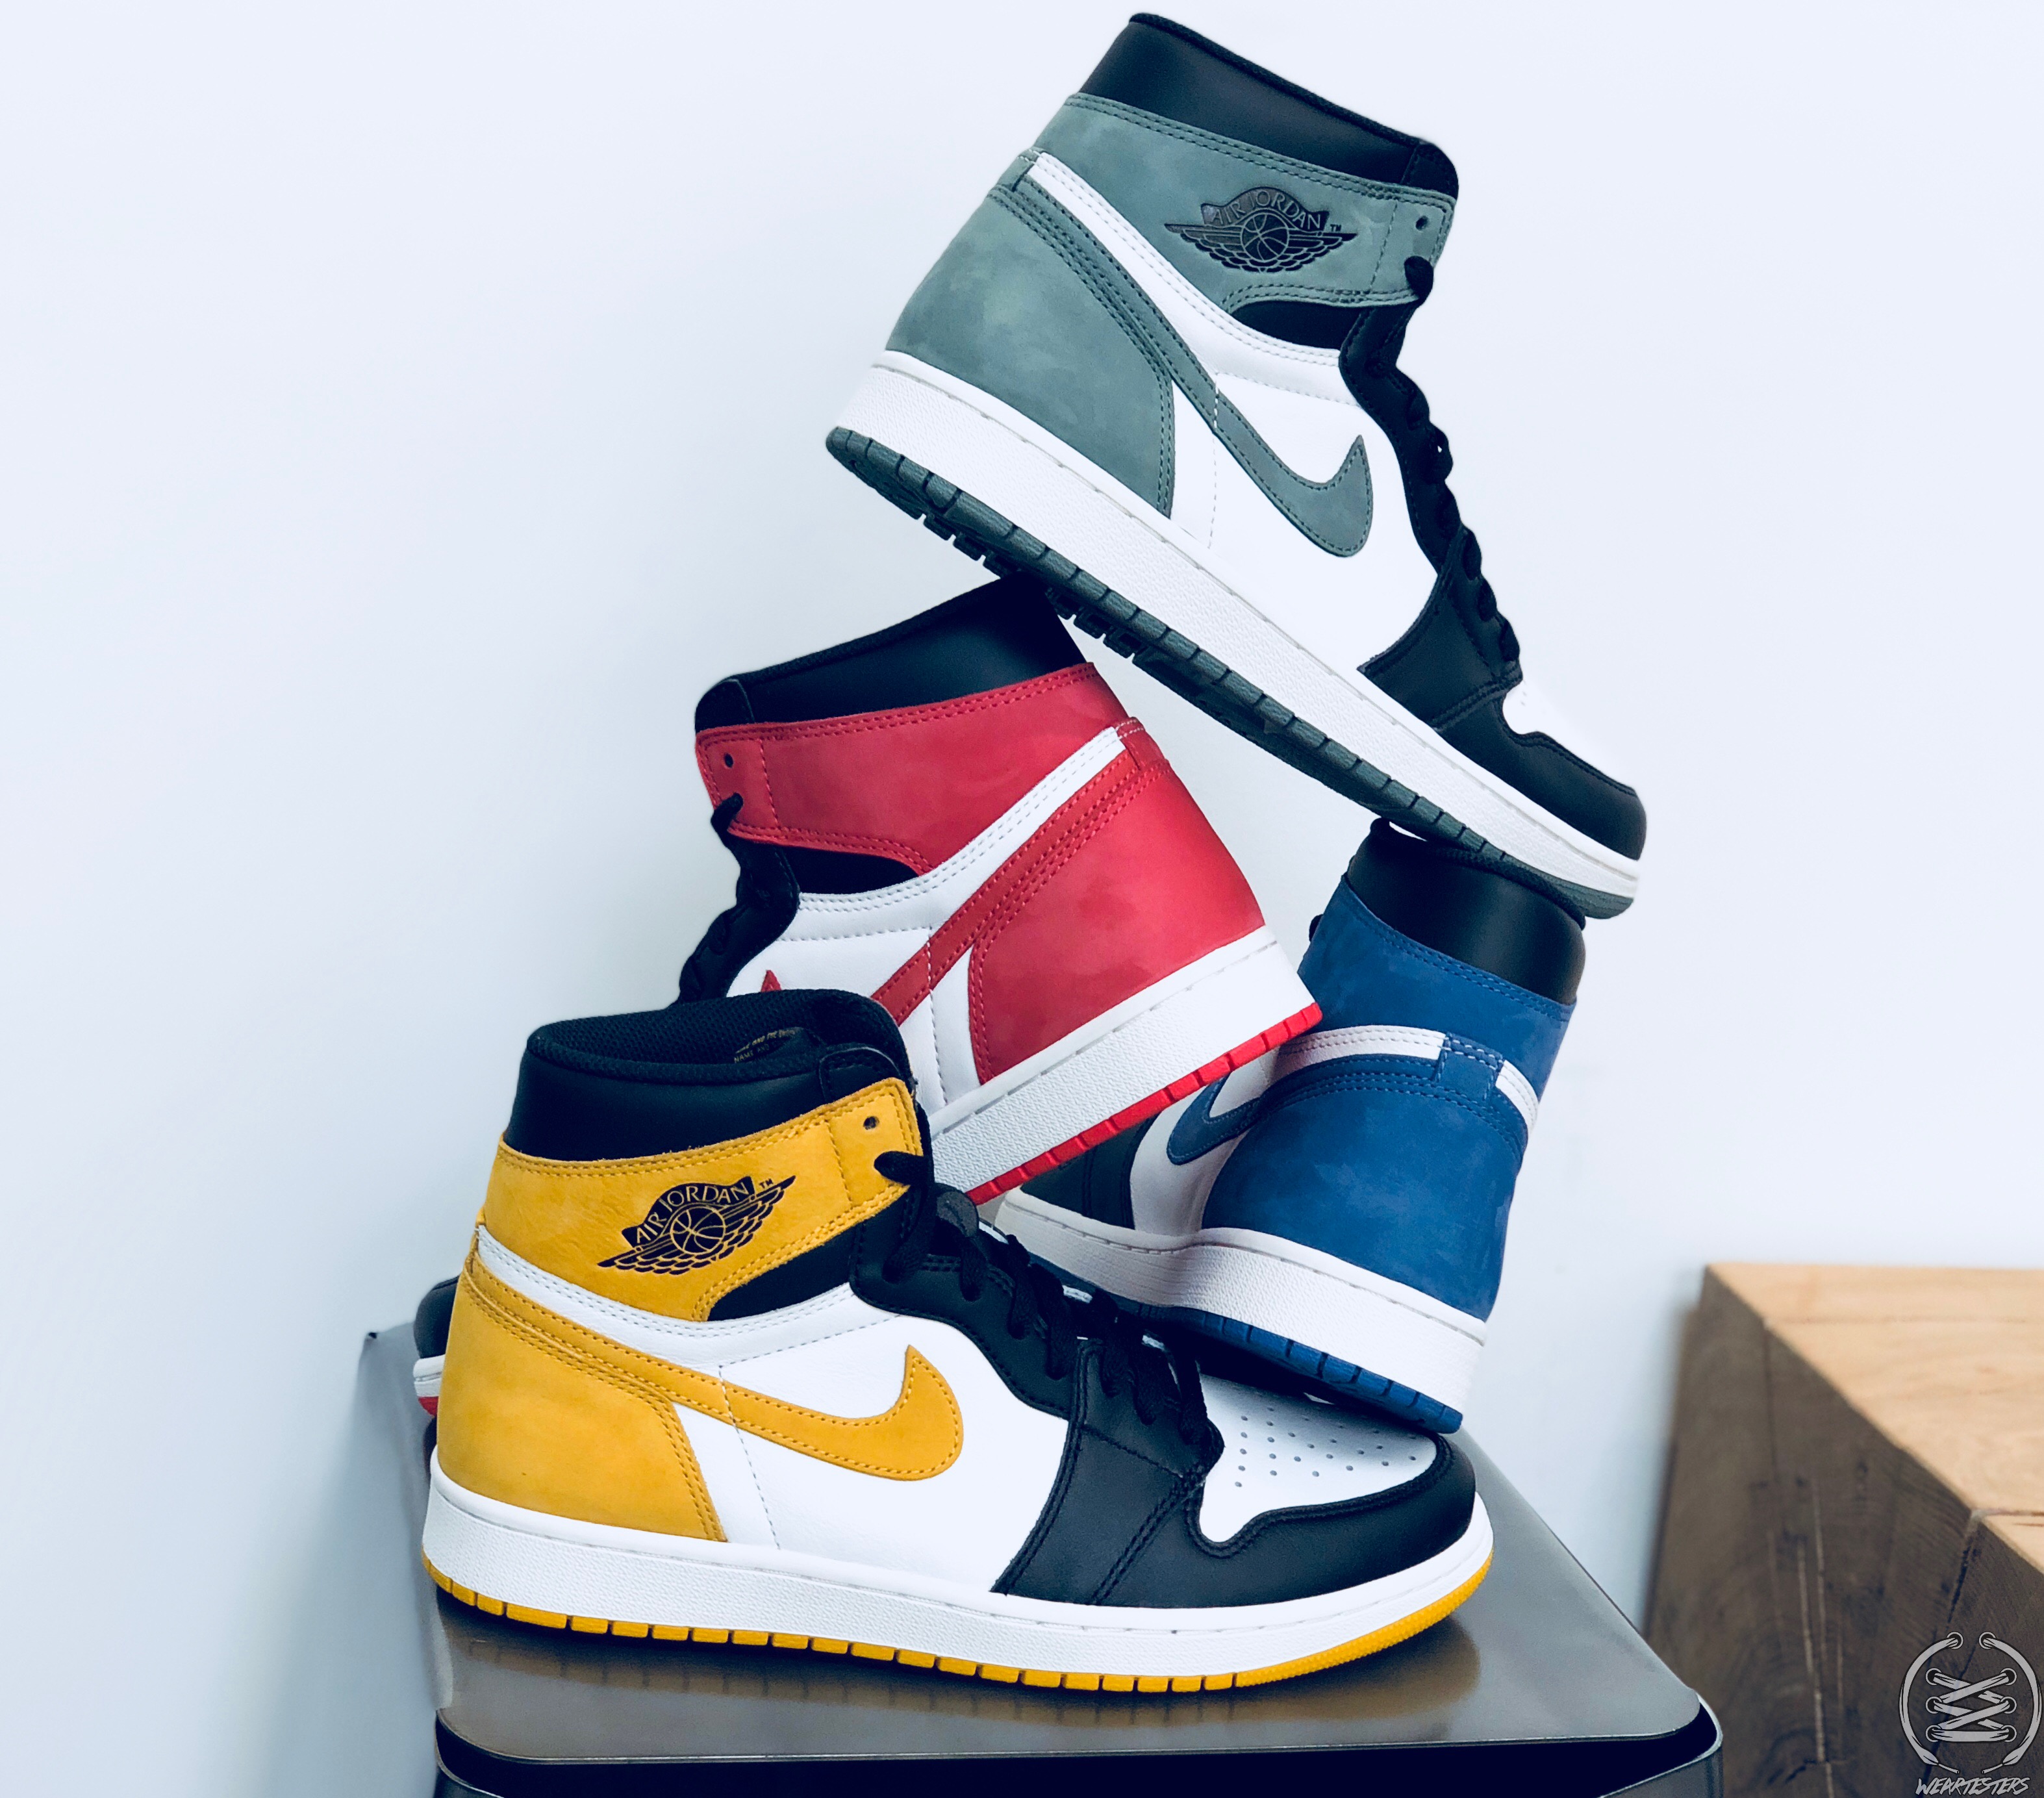 Air Jordan 1 Best Hand in the Game collection 1